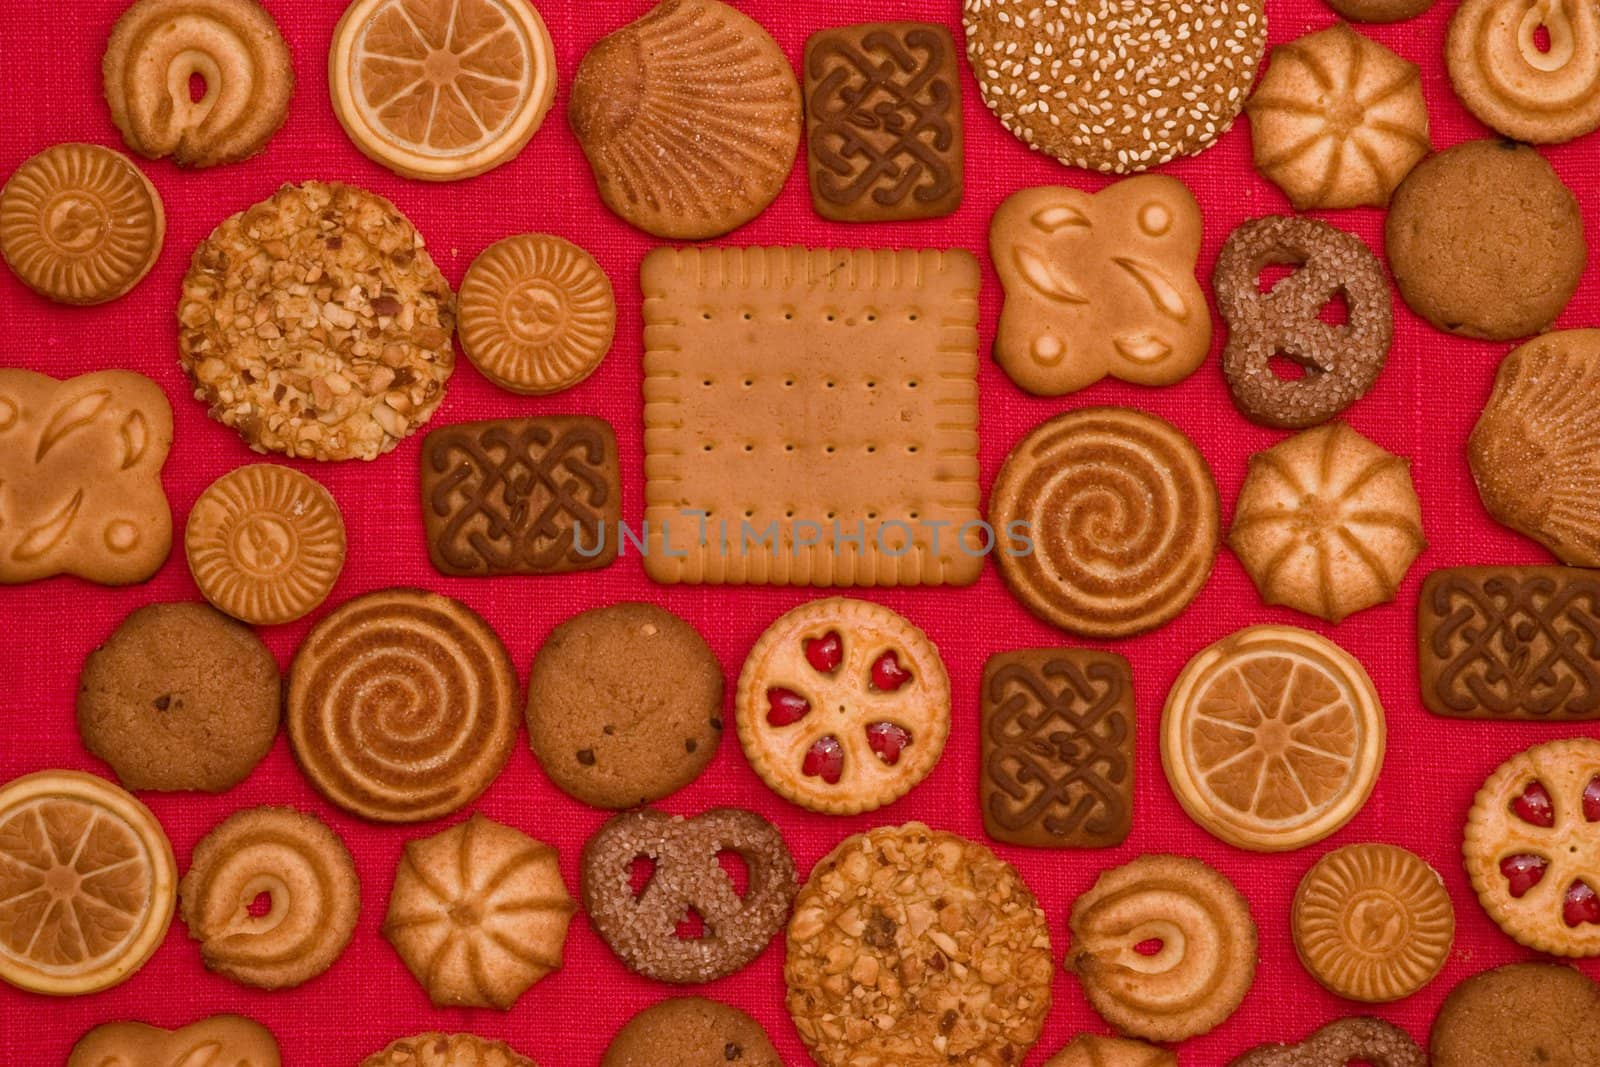 sweet background: different pastry on the red